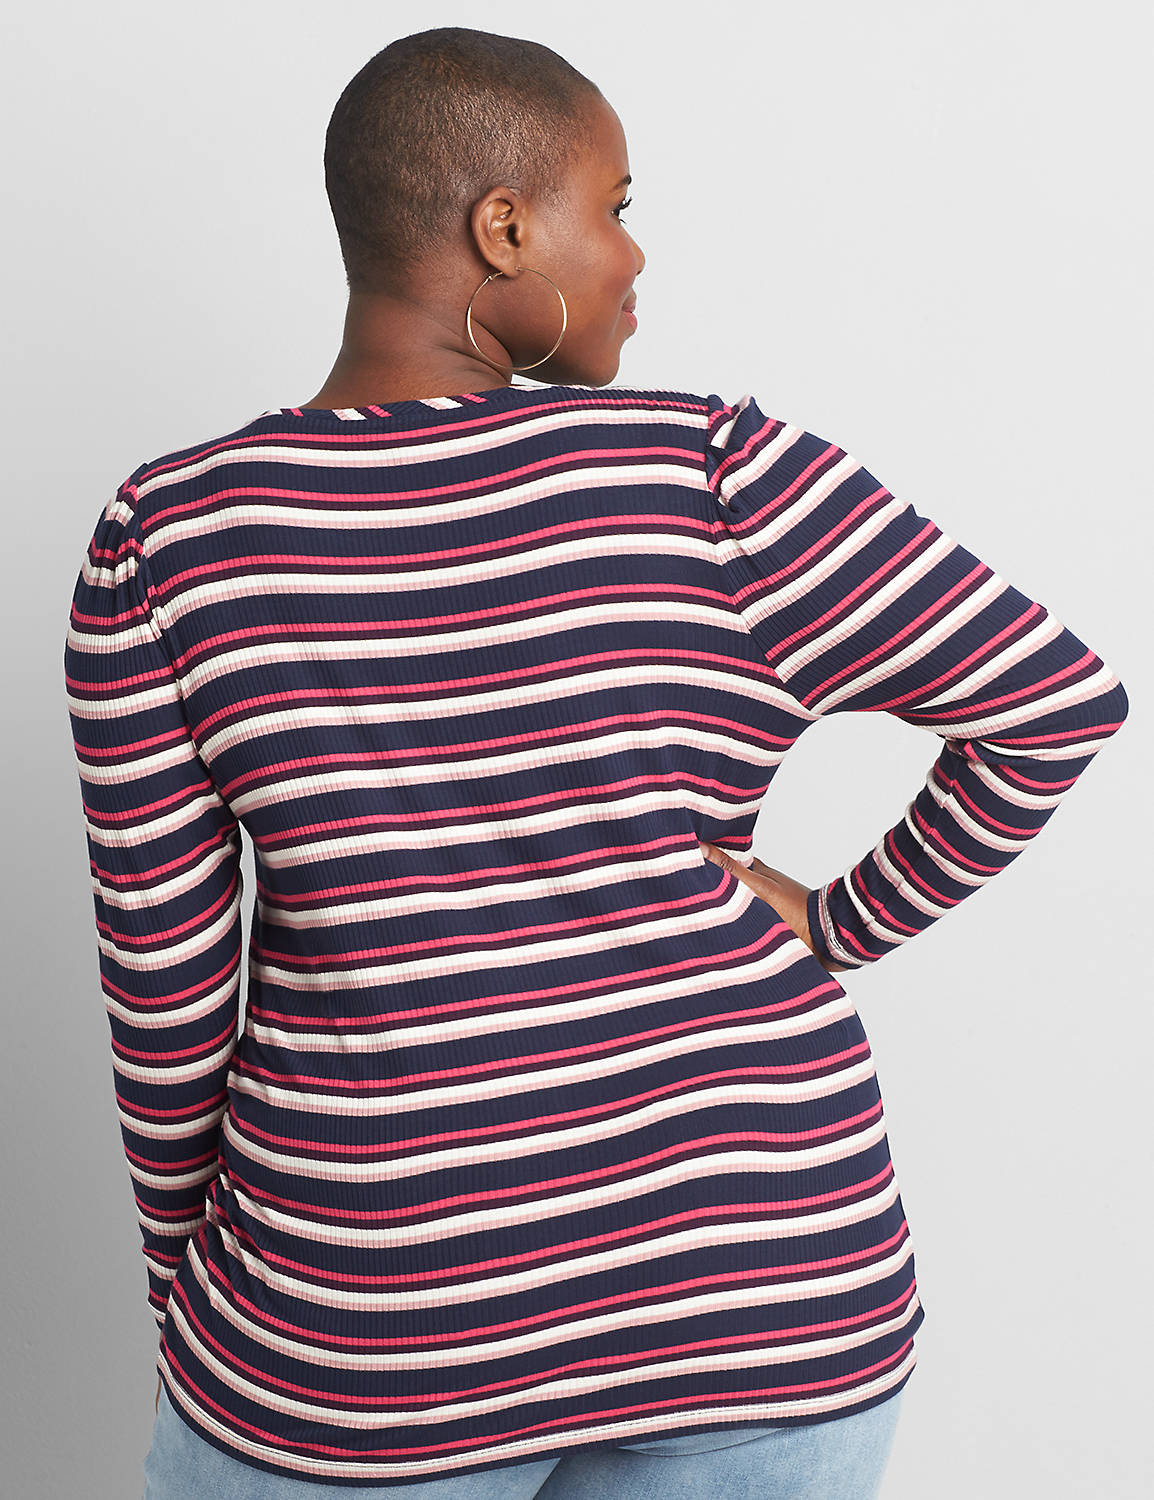 Long Sleeve Crew Neck Tee in Rib Fabric with Stripe 1119226:Stripe:22/24 Product Image 2